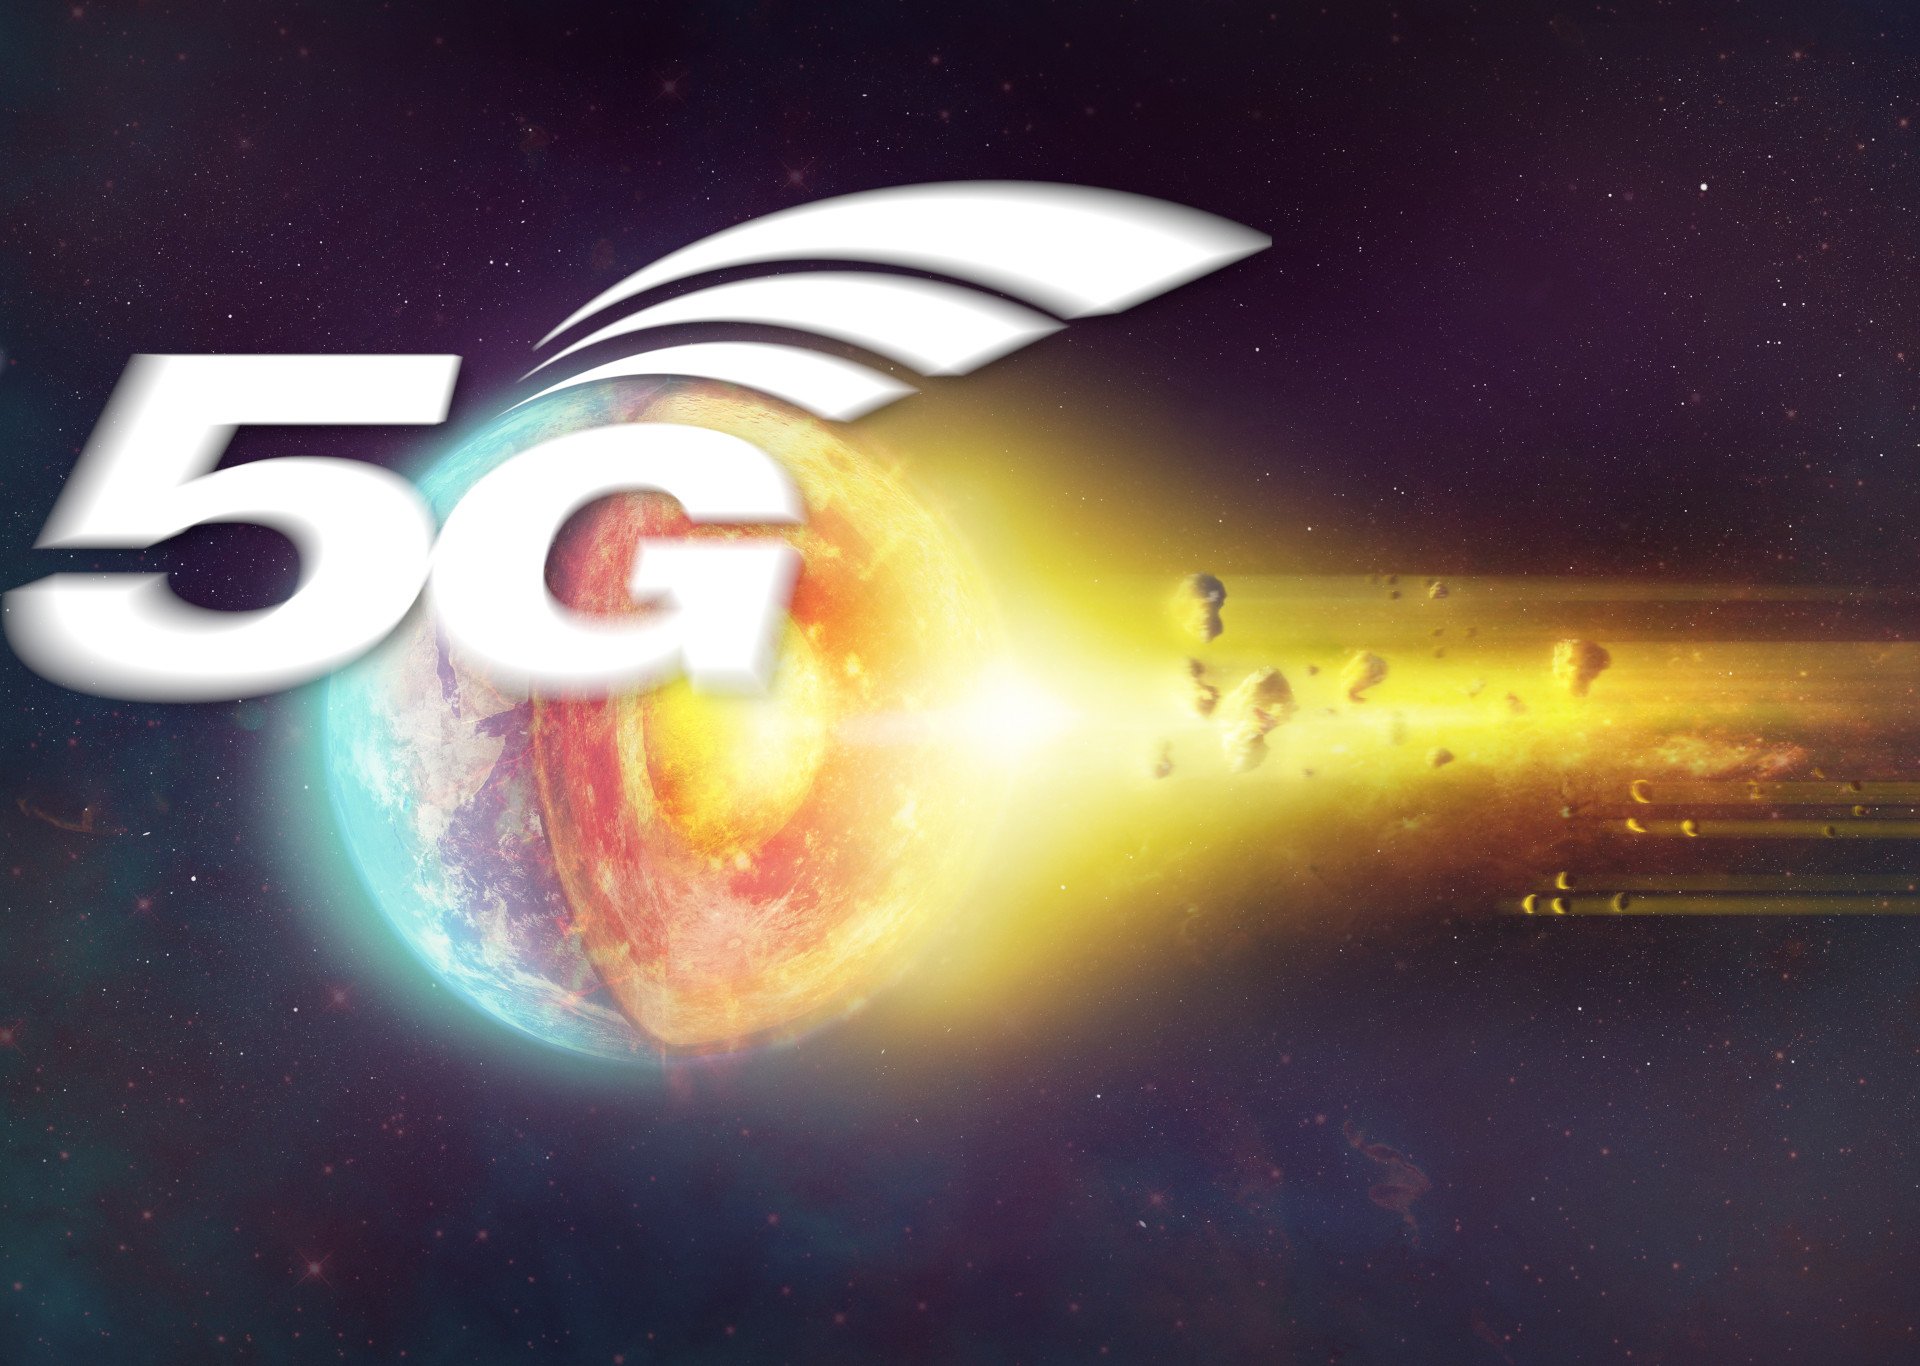 5g the